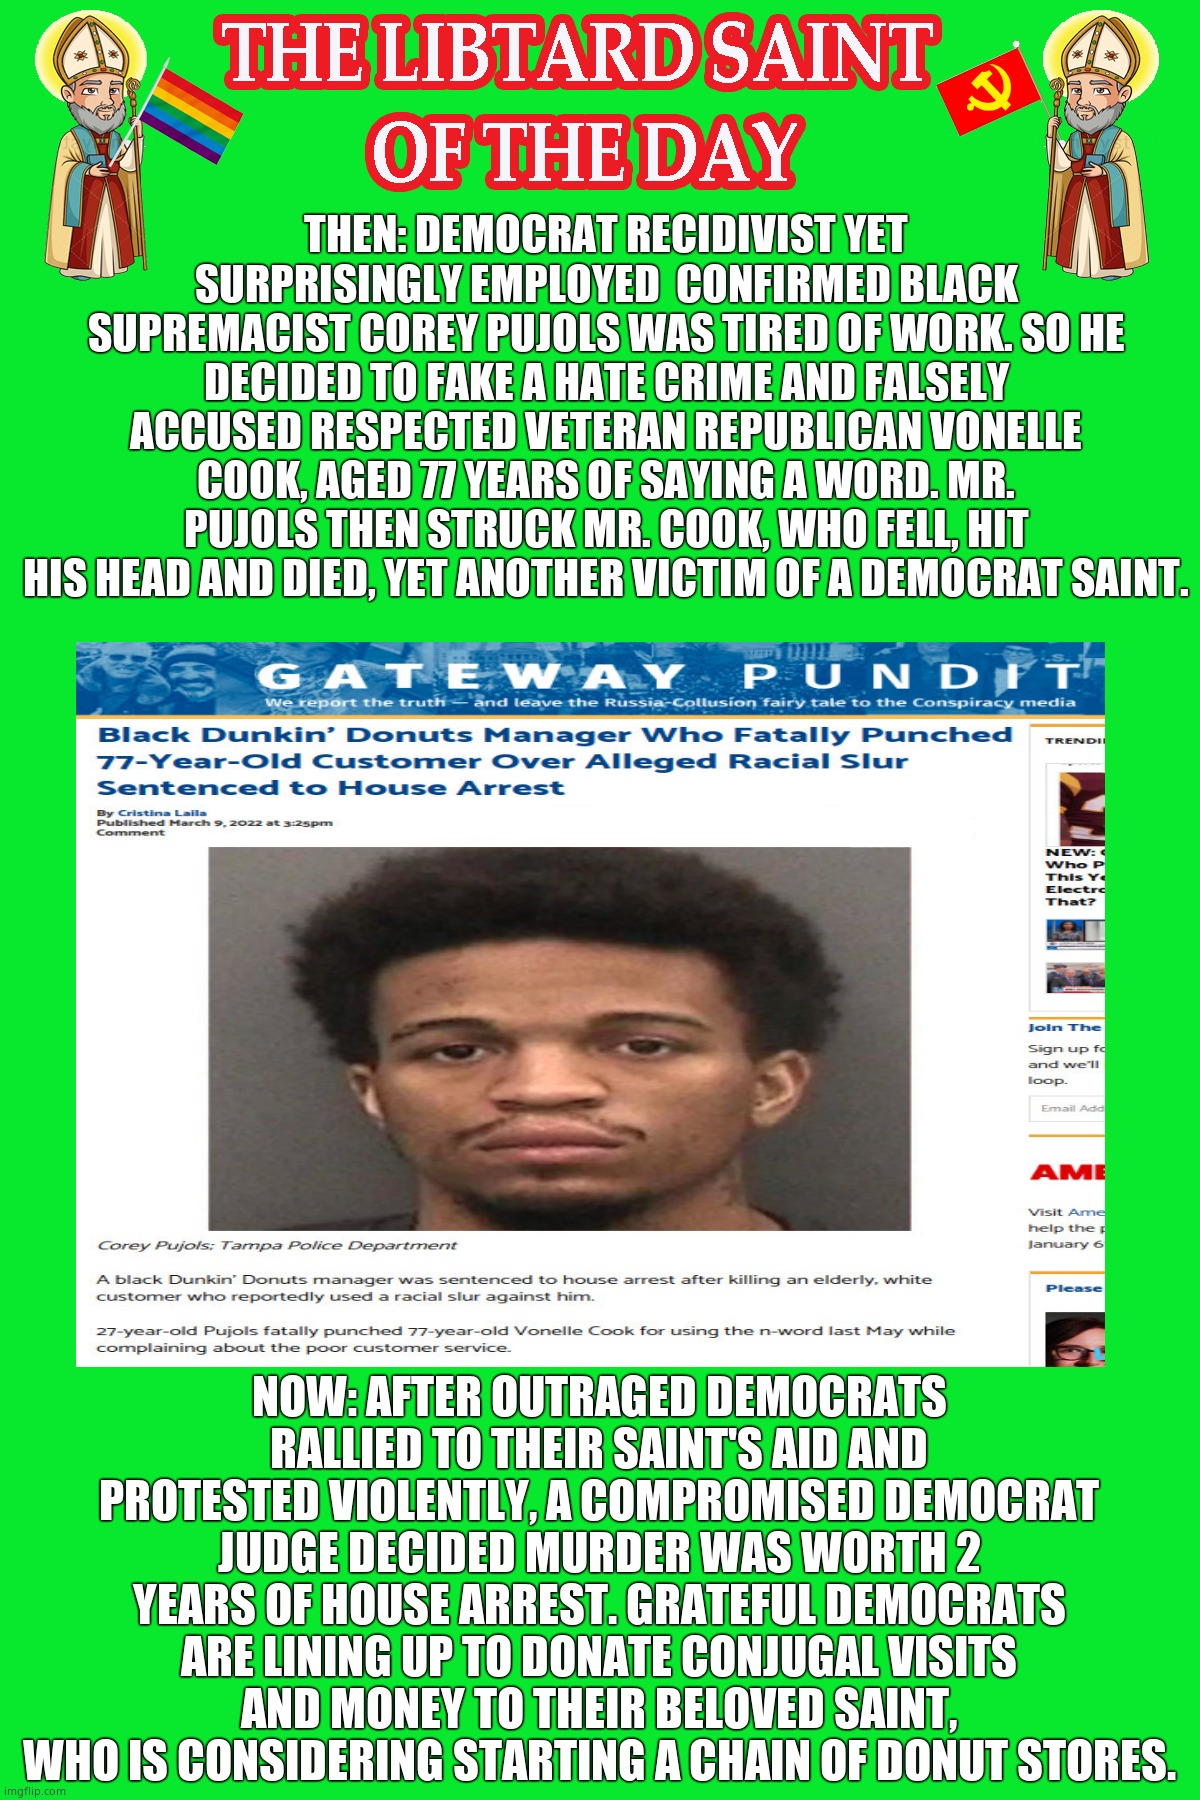 LIBTURD SAINT OF THE DAY - DEMOCRAT RECIDIVIST BLACK SUPREMACIST - COREY PUJOLS - RACIST MURDER | THEN: DEMOCRAT RECIDIVIST YET SURPRISINGLY EMPLOYED  CONFIRMED BLACK SUPREMACIST COREY PUJOLS WAS TIRED OF WORK. SO HE DECIDED TO FAKE A HATE CRIME AND FALSELY ACCUSED RESPECTED VETERAN REPUBLICAN VONELLE COOK, AGED 77 YEARS OF SAYING A WORD. MR. PUJOLS THEN STRUCK MR. COOK, WHO FELL, HIT HIS HEAD AND DIED, YET ANOTHER VICTIM OF A DEMOCRAT SAINT. NOW: AFTER OUTRAGED DEMOCRATS RALLIED TO THEIR SAINT'S AID AND PROTESTED VIOLENTLY, A COMPROMISED DEMOCRAT JUDGE DECIDED MURDER WAS WORTH 2 YEARS OF HOUSE ARREST. GRATEFUL DEMOCRATS ARE LINING UP TO DONATE CONJUGAL VISITS AND MONEY TO THEIR BELOVED SAINT, WHO IS CONSIDERING STARTING A CHAIN OF DONUT STORES. | image tagged in lotd,libturd saint of the day,corey pujols | made w/ Imgflip meme maker